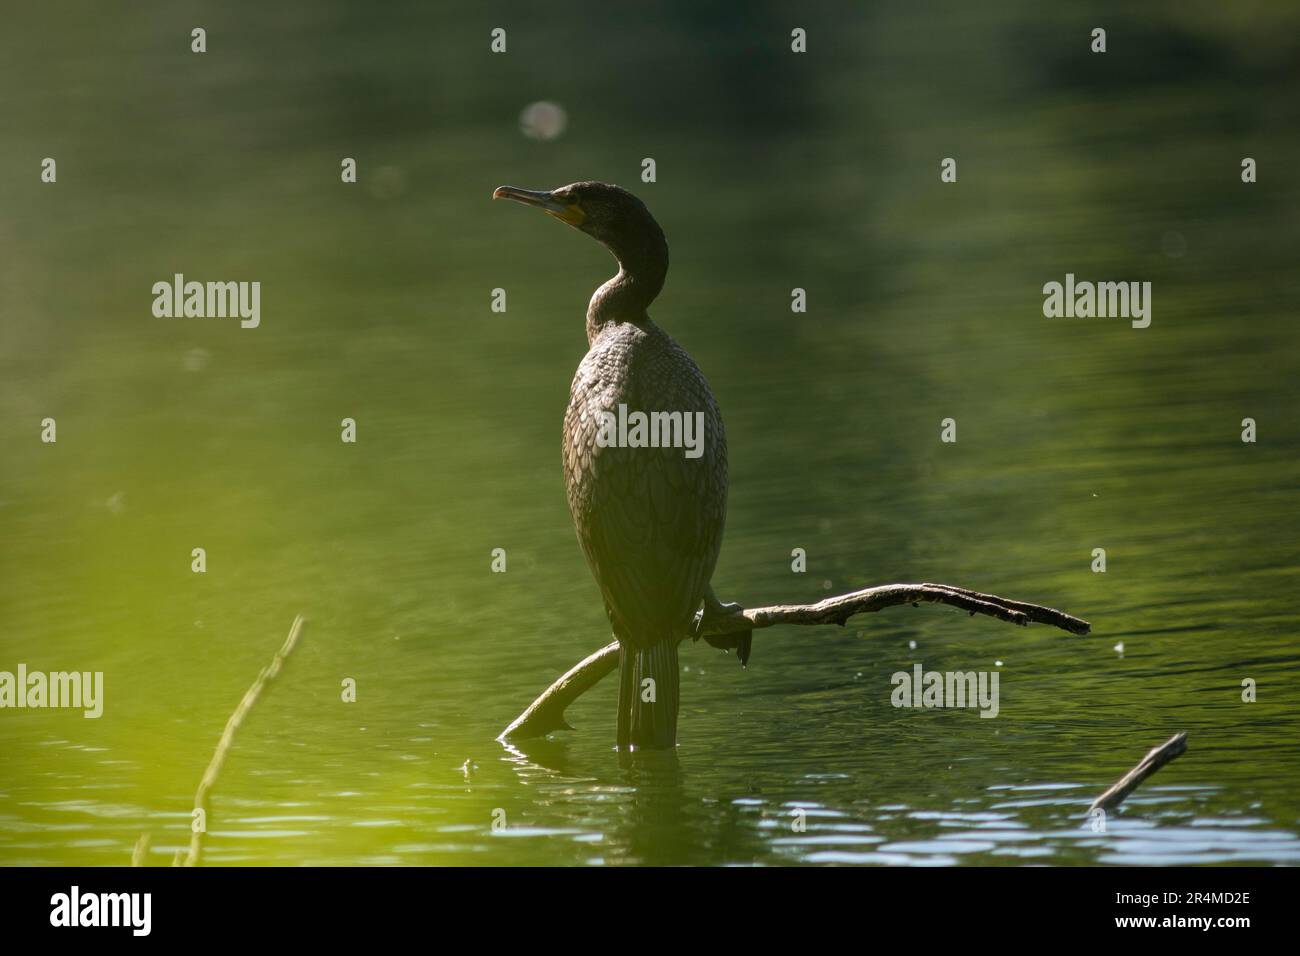 The great cormorant (Phalacrocorax carbo), known as the black shag or kawau in New Zealand, formerly also known as the great black cormorant across th Stock Photo